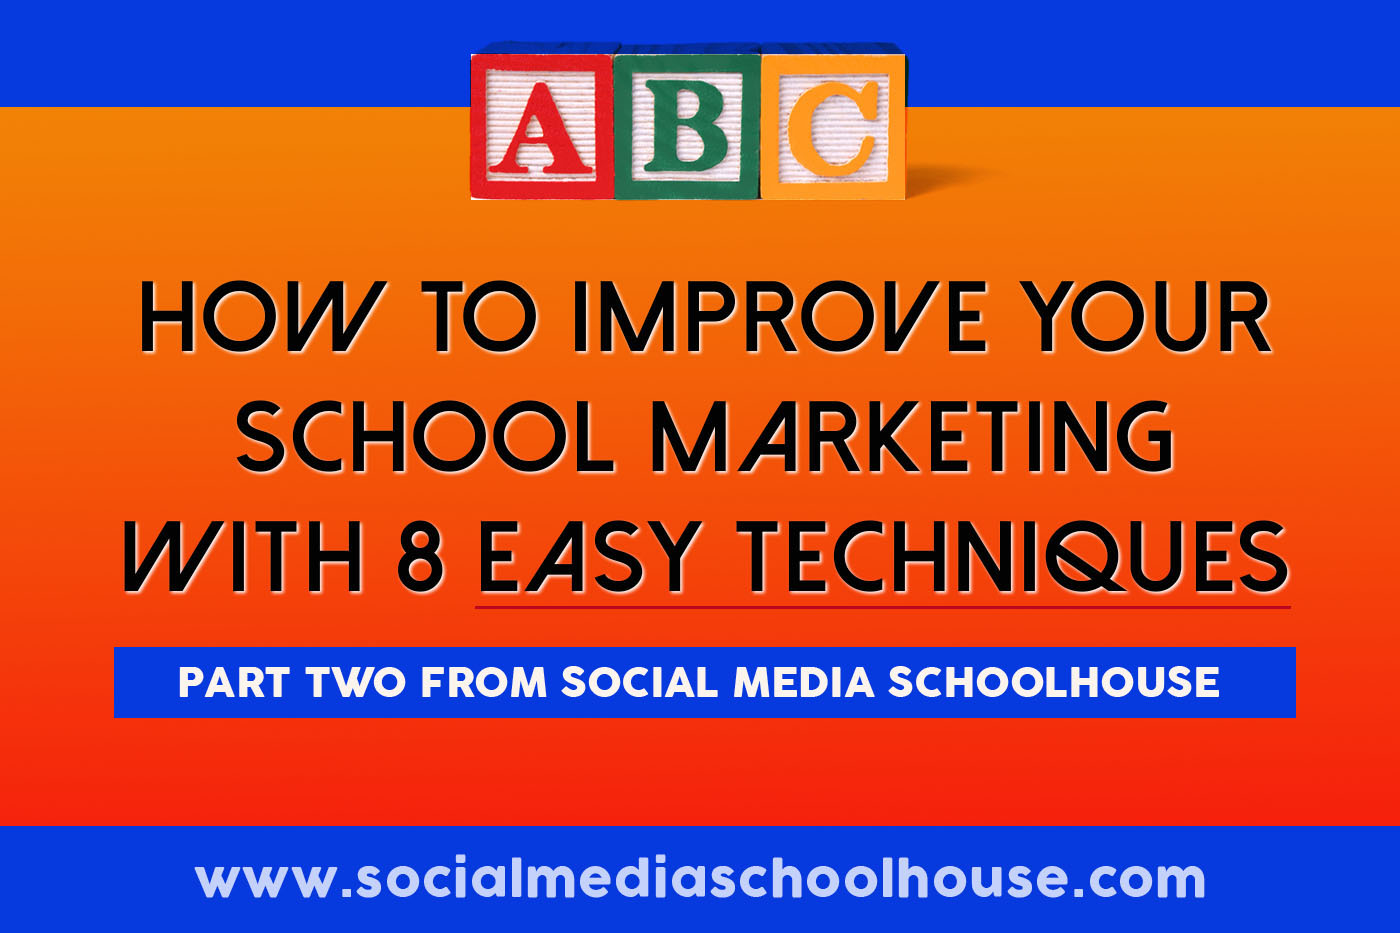 8 Simple Tips to Improve Your School Marketing [Part 2]